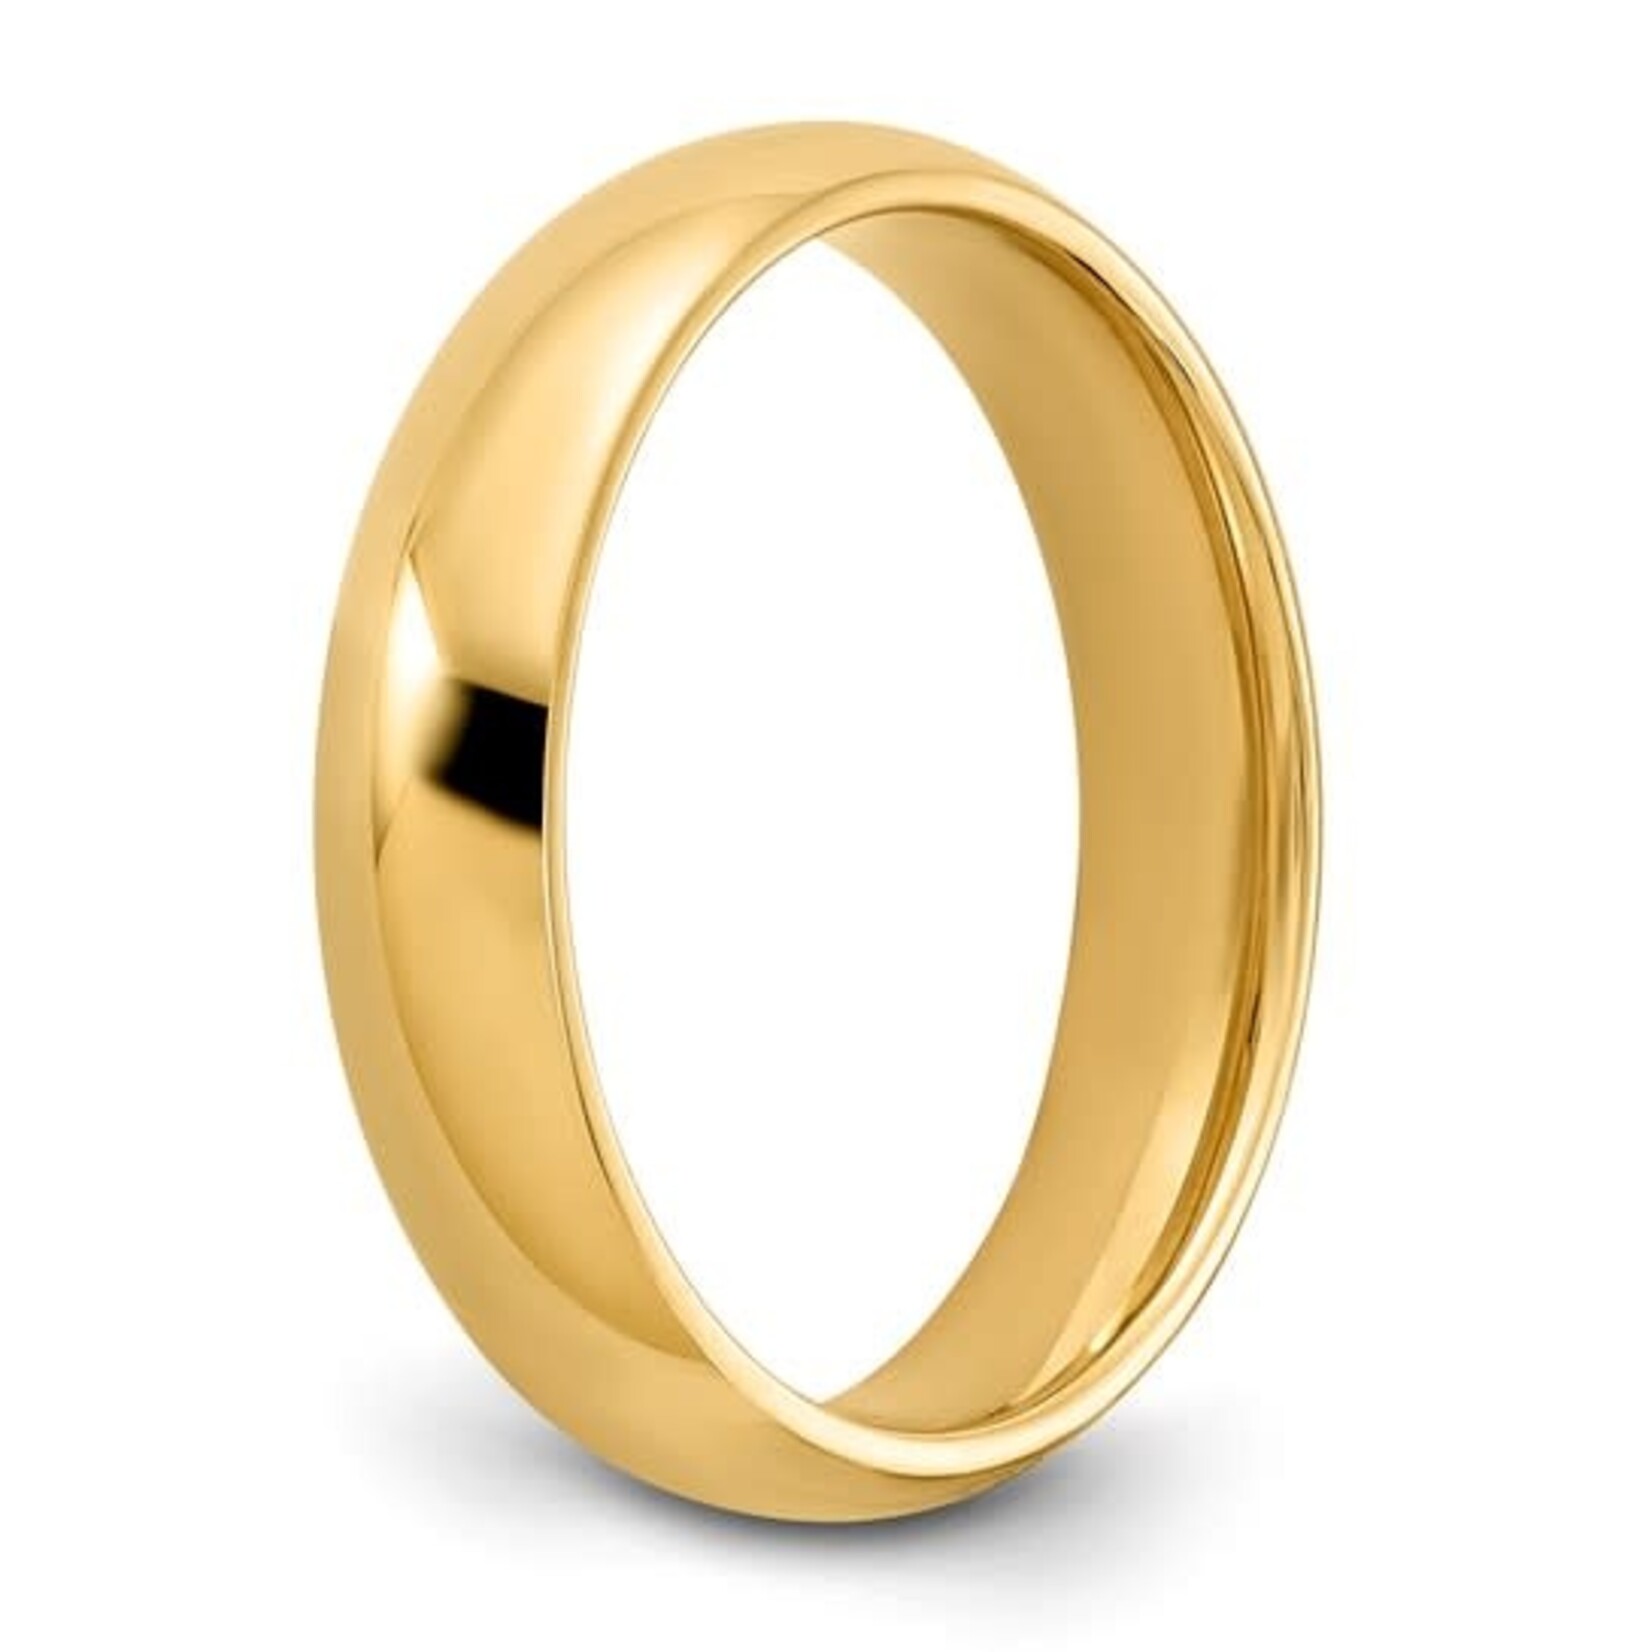 Quality Gold 14k Yellow Gold 5mm Standard Weight Comfort Fit Wedding Band Size 10.5